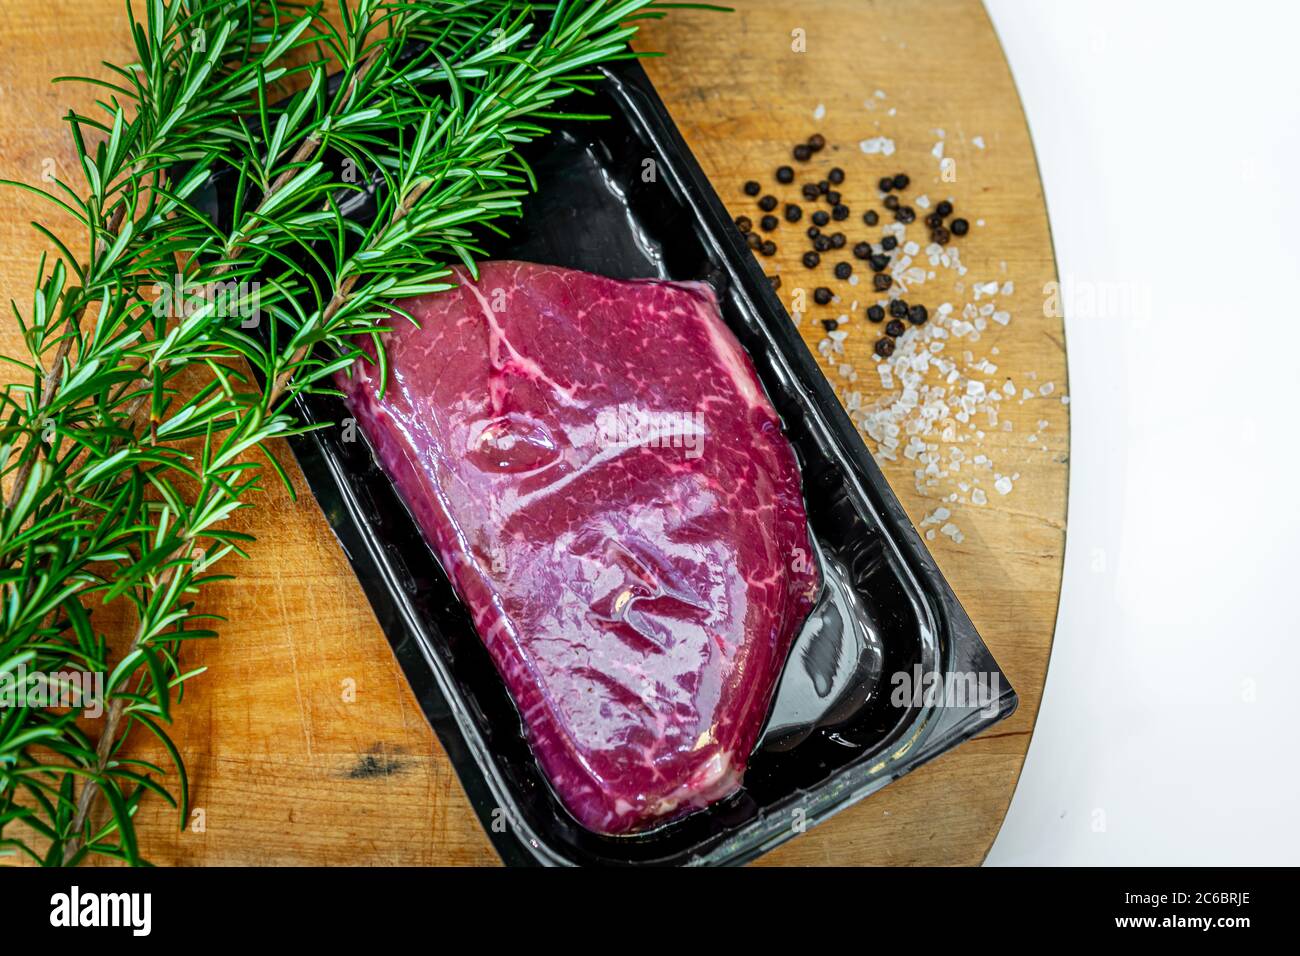 Beef steak in airtight skin packaging and spices on wooden chopping board Stock Photo